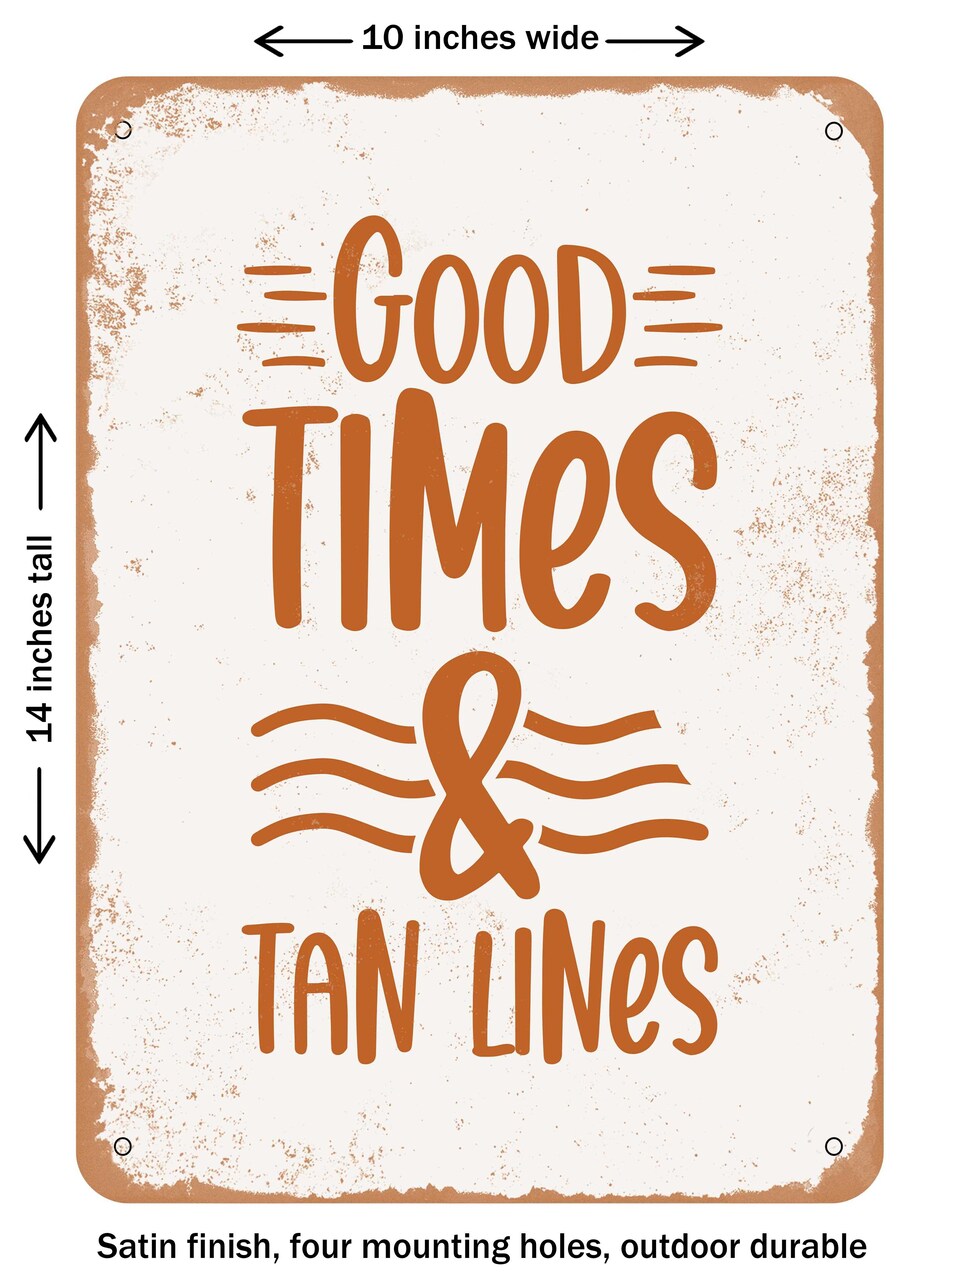 DECORATIVE METAL SIGN - Good Times and Tan Lines  - Vintage Rusty Look